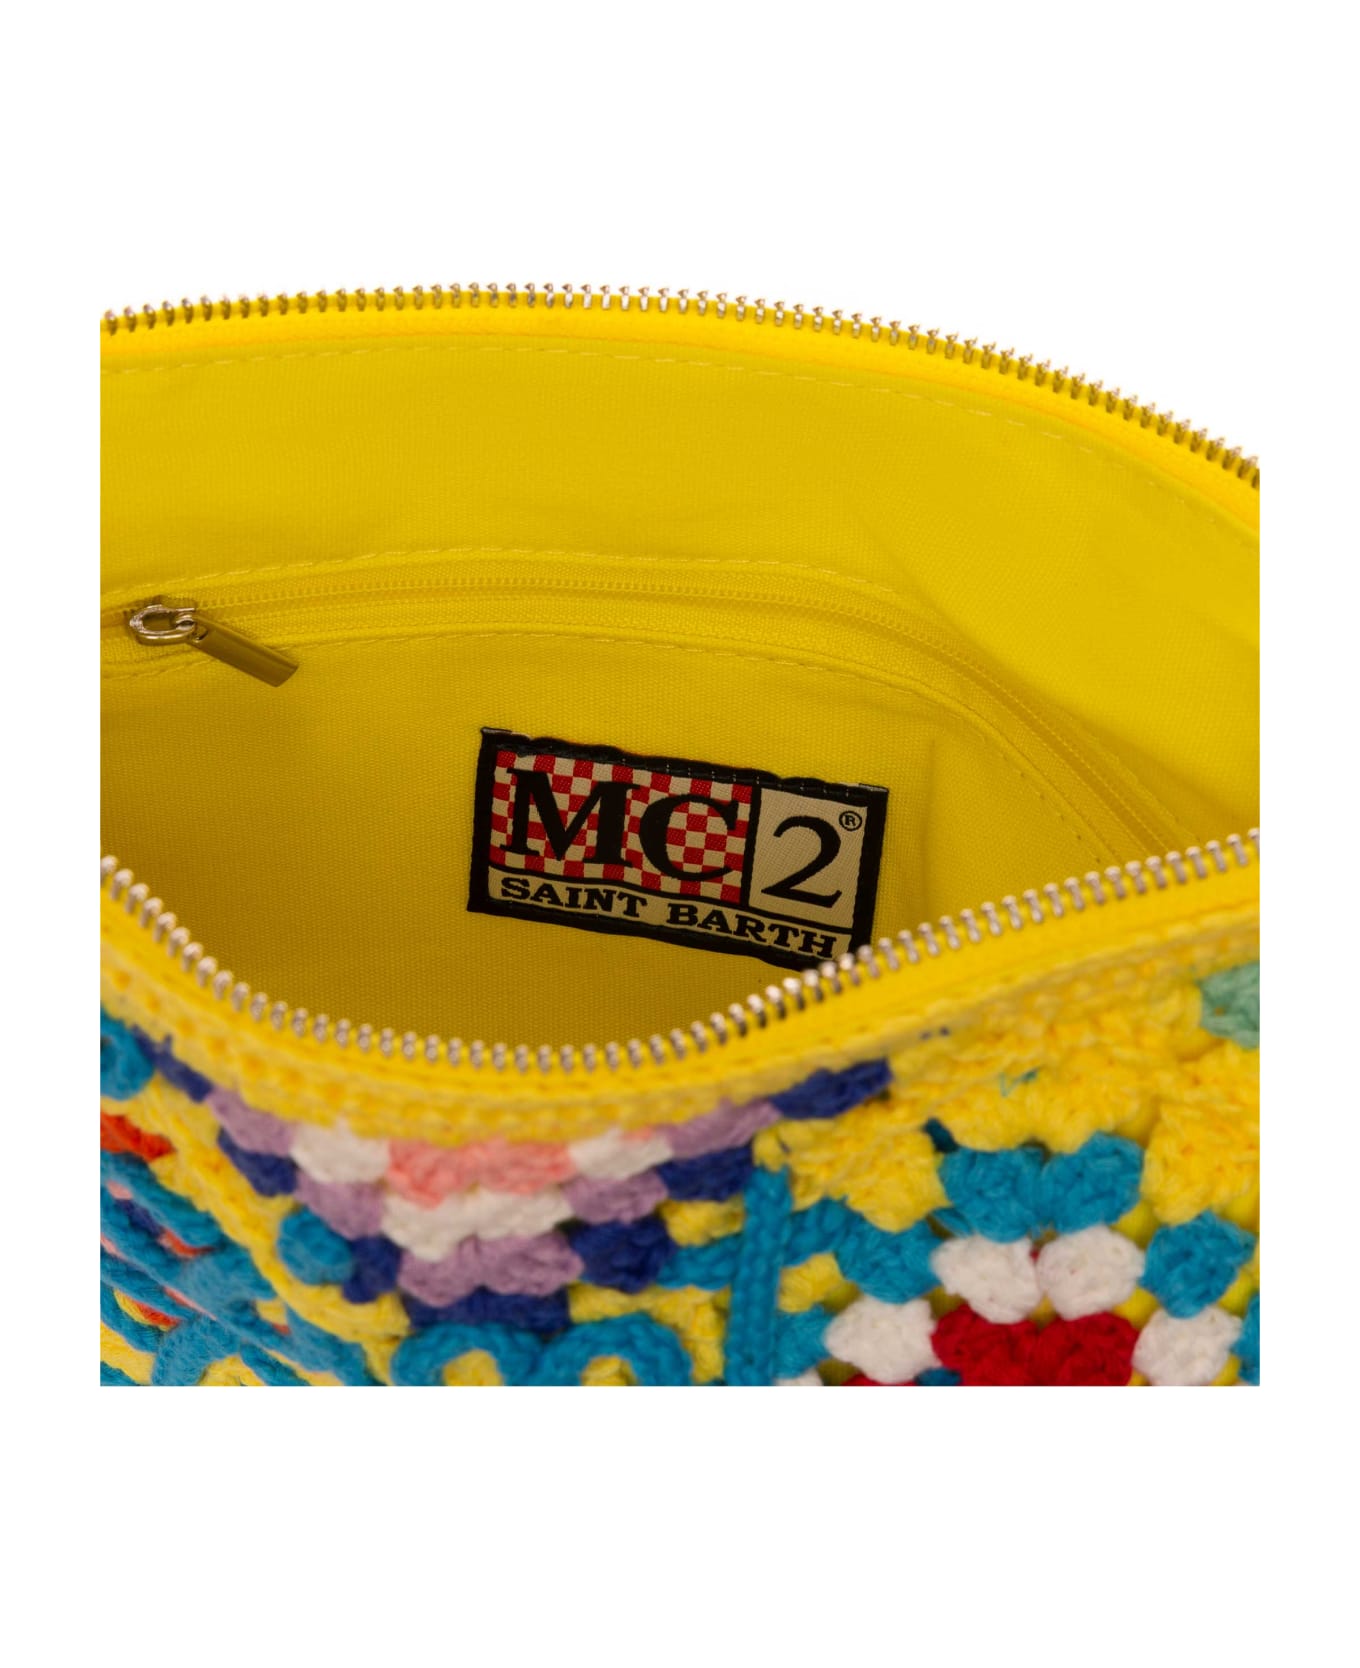 MC2 Saint Barth Parisienne Yellow Crochet Pouch Bag With Saint Barth Embroidery - YELLOW